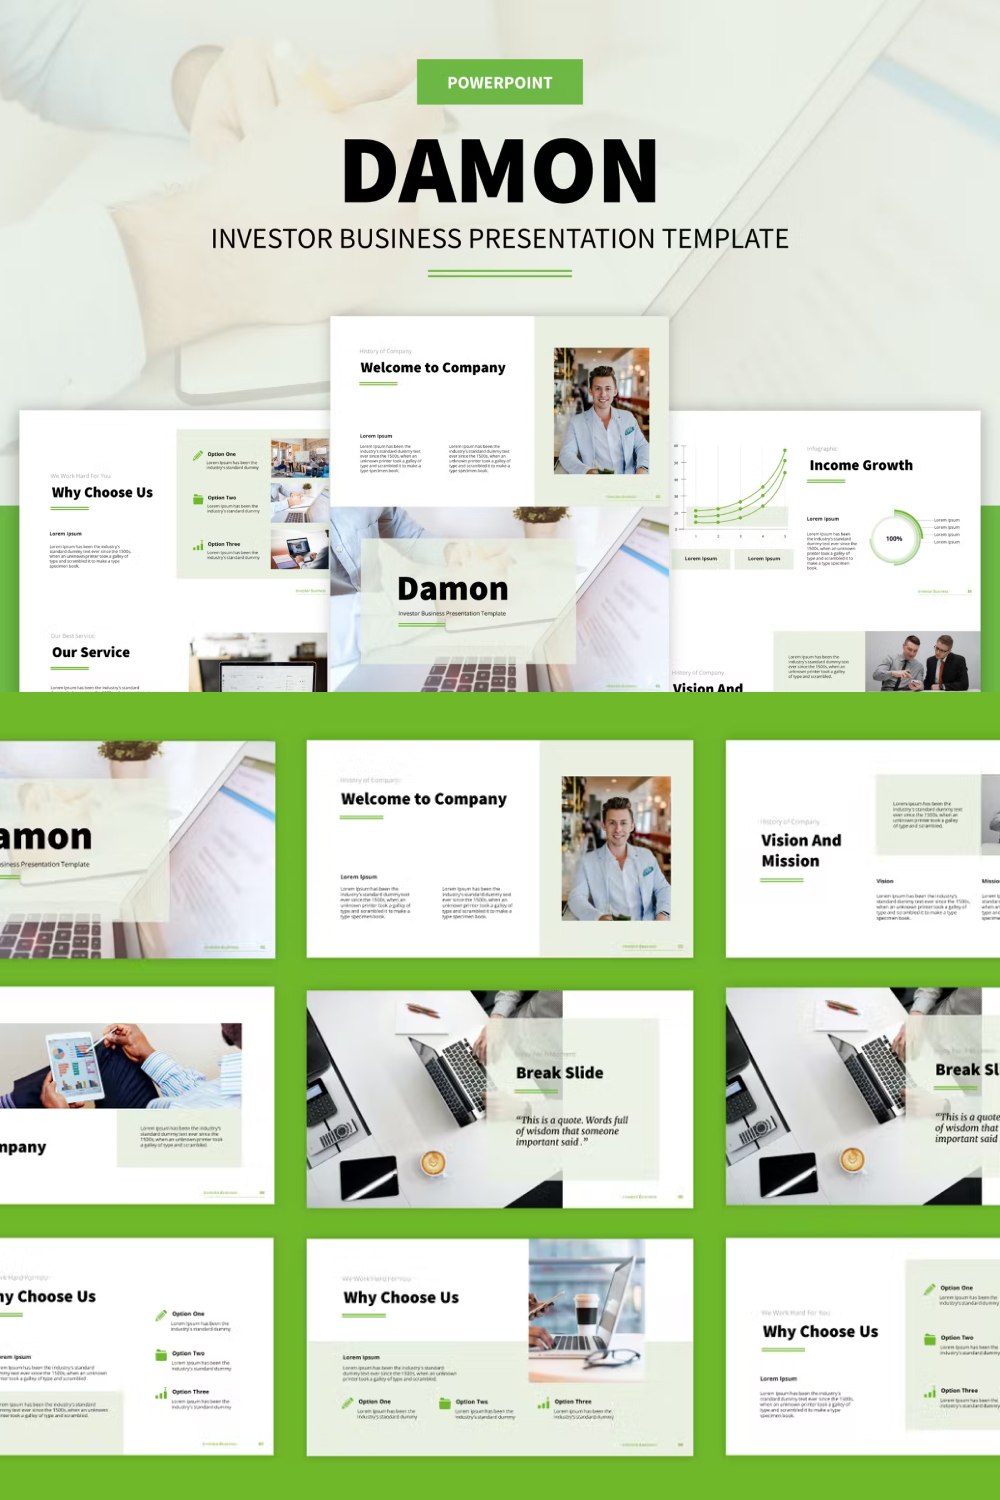 Investor business powerpoint templates of pinterest.